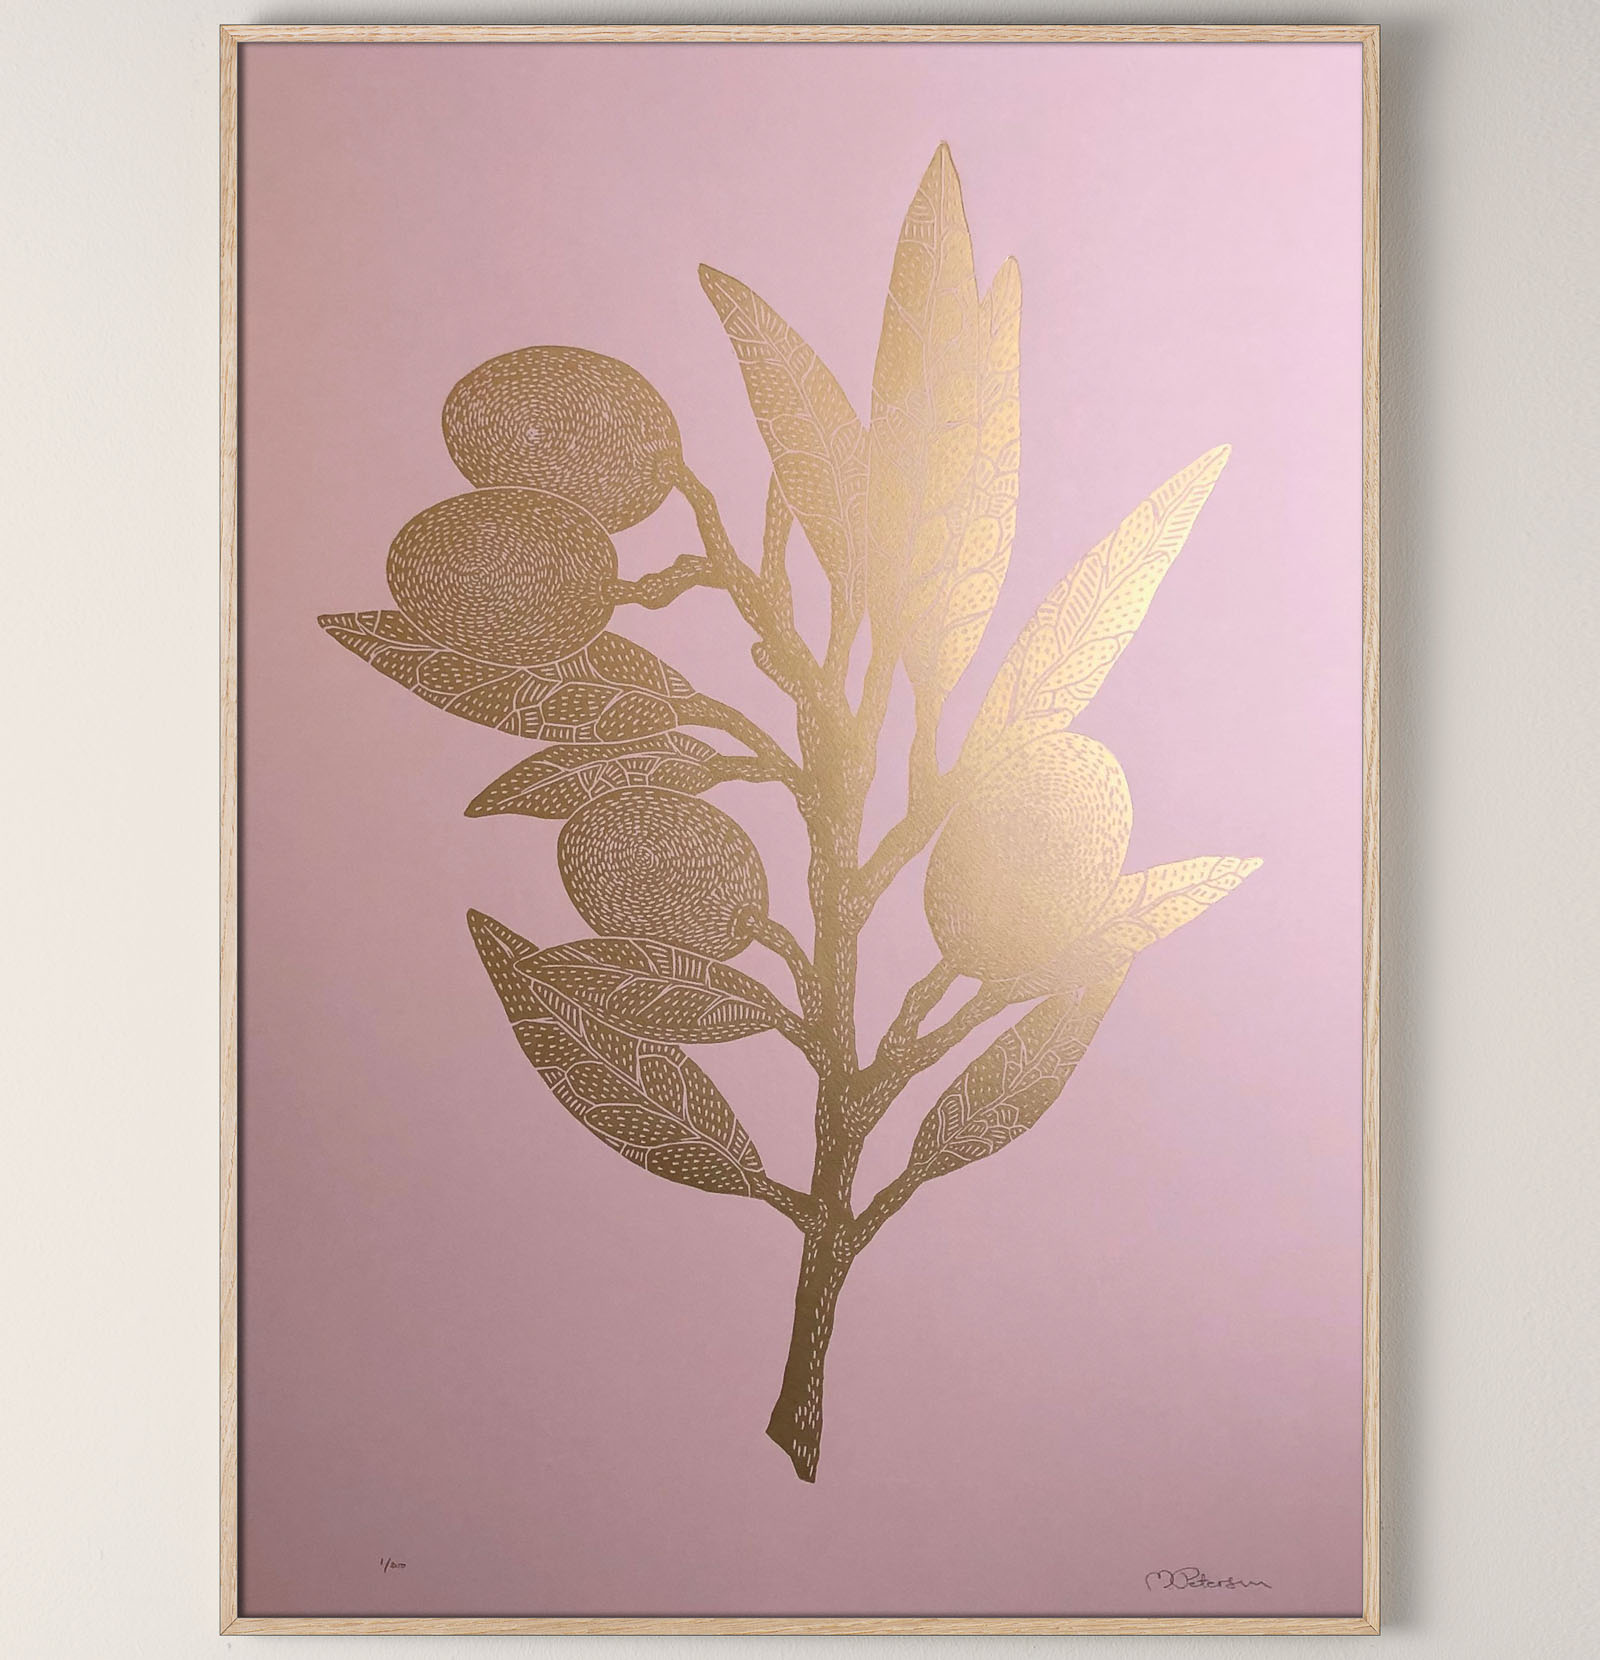 posters-prints, linocuts, aesthetic, figurative, graphical, pop, still-life, botany, nature, pastel, pink, acrylic, ink, paper, beautiful, danish, decorative, design, interior, interior-design, modern, modern-art, nordic, plants, scandinavien, Buy original high quality art. Paintings, drawings, limited edition prints & posters by talented artists.